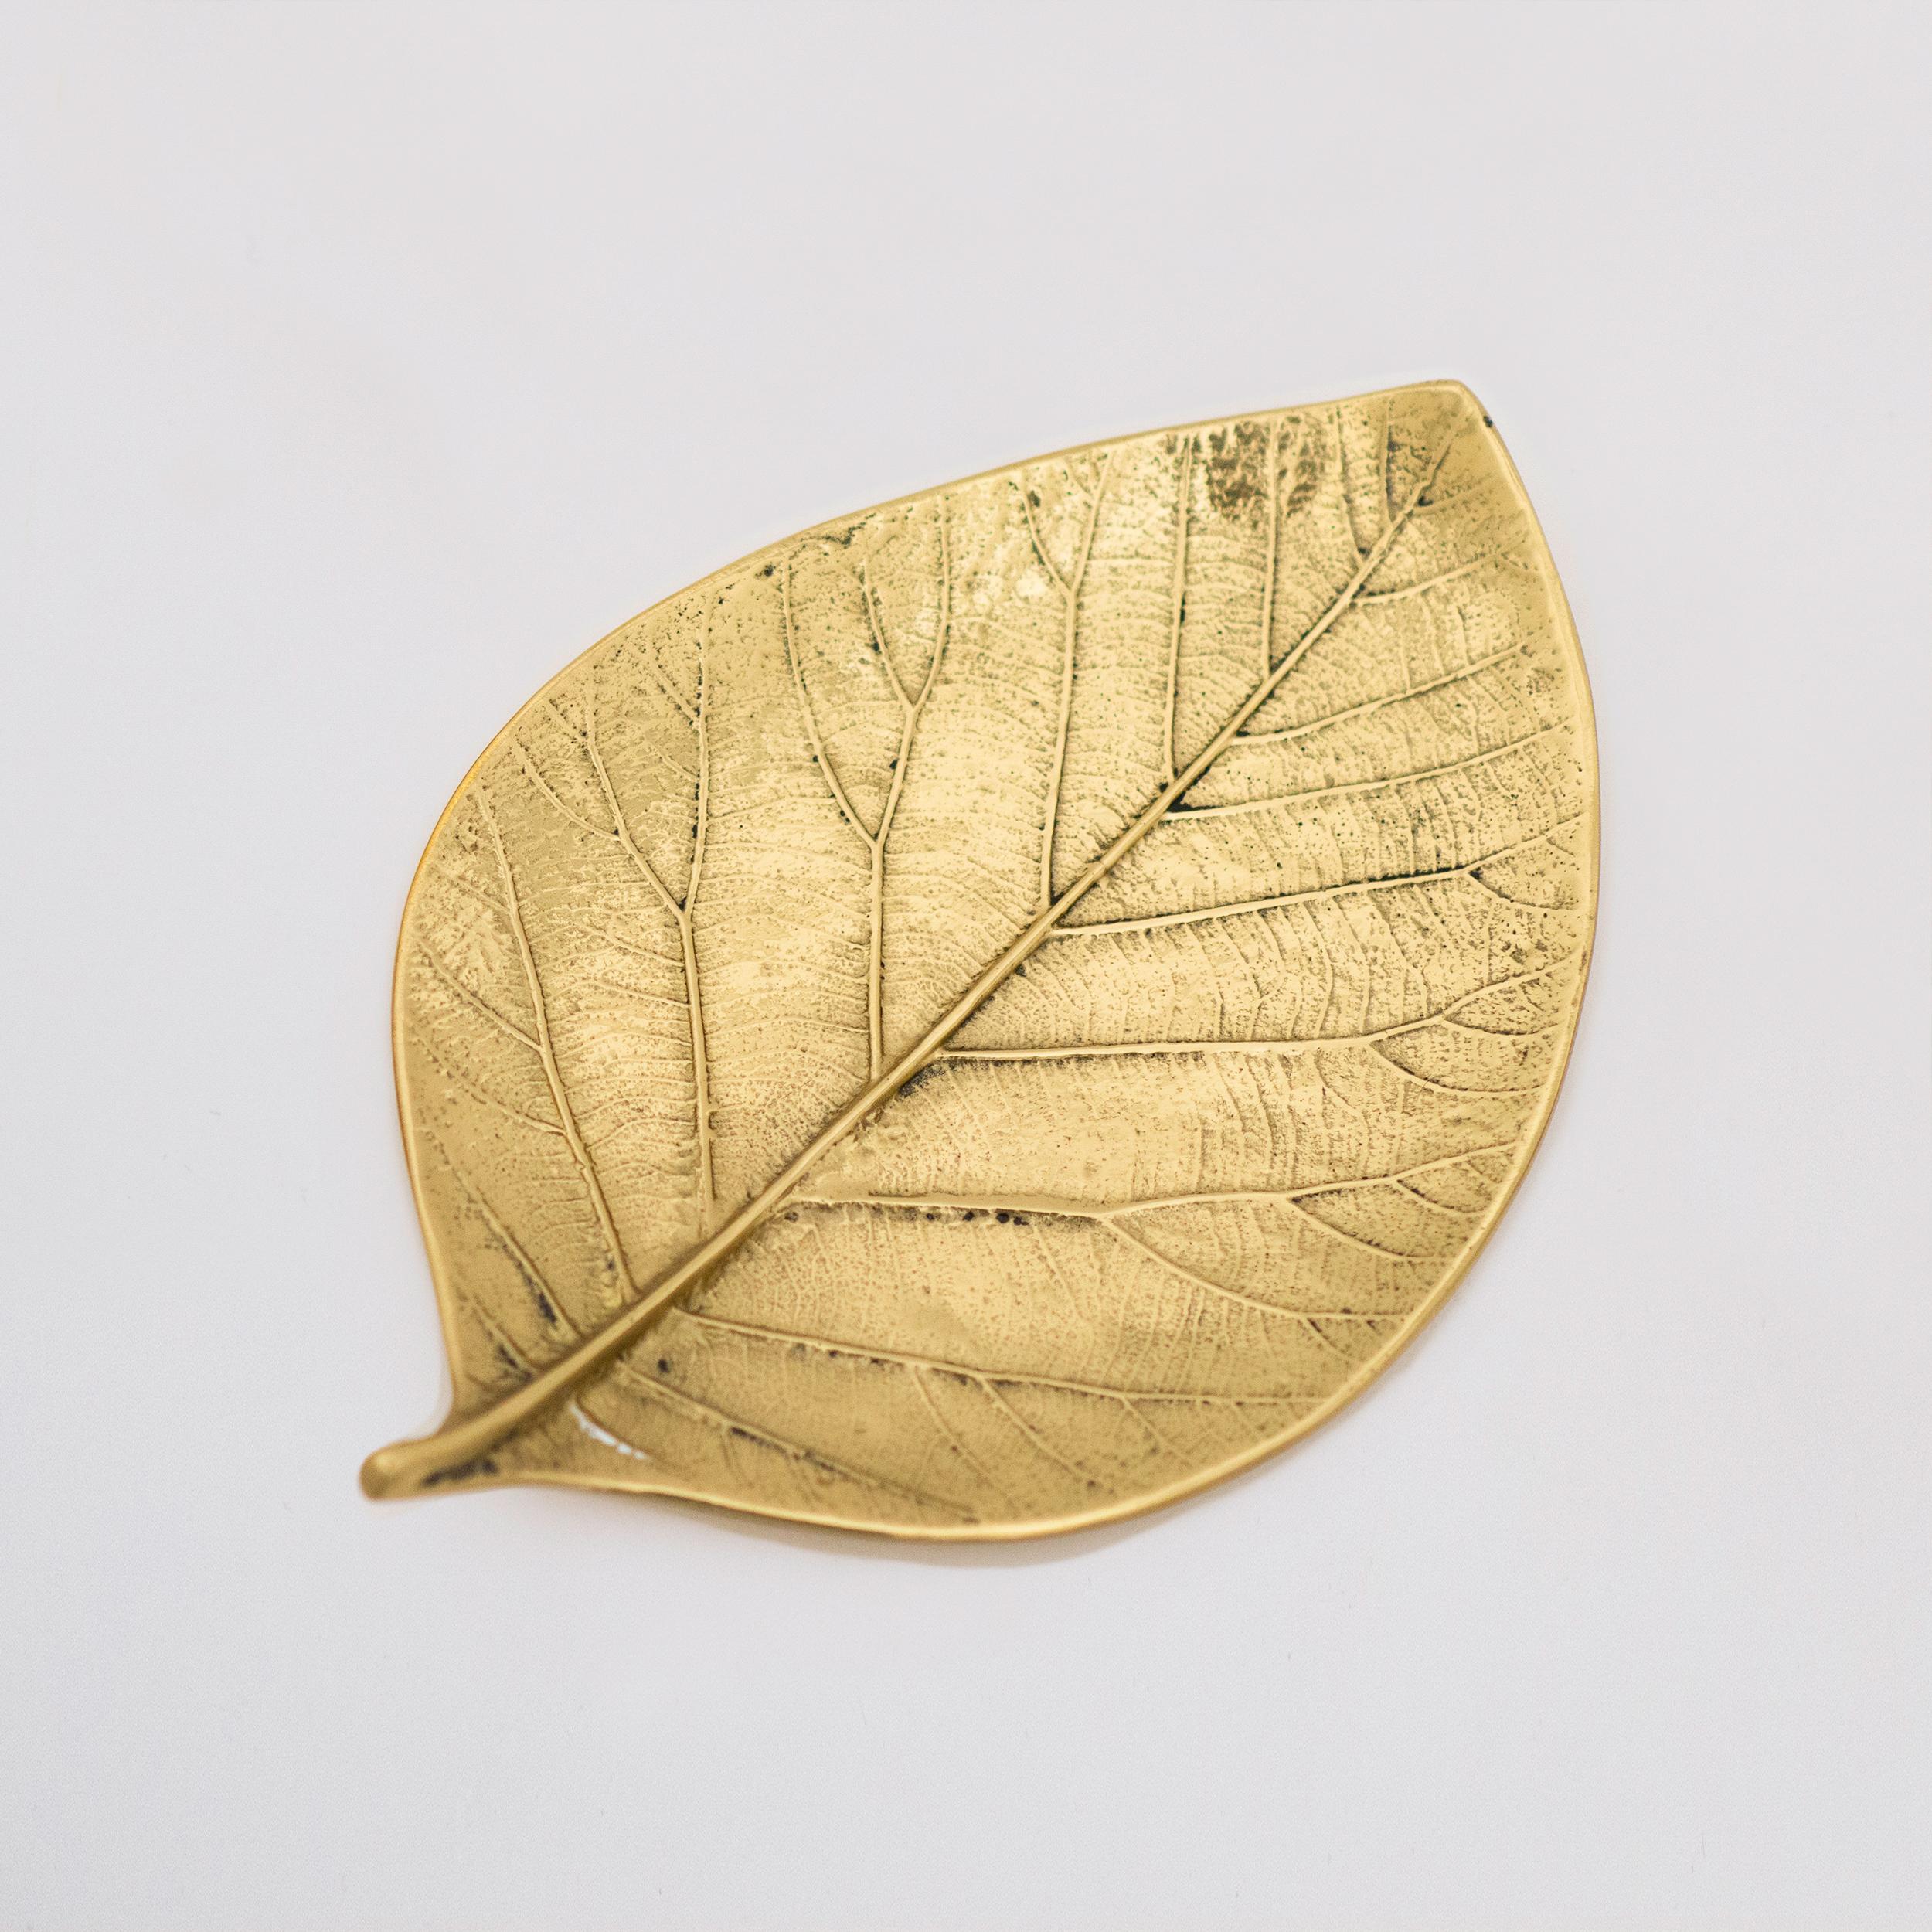 Each of these splendid brass leaves is handmade individually with incredible detail. Cast using very traditional techniques, they are polished capturing the raw finish of this noble material and impressively highlighting every vein and detail.

Used